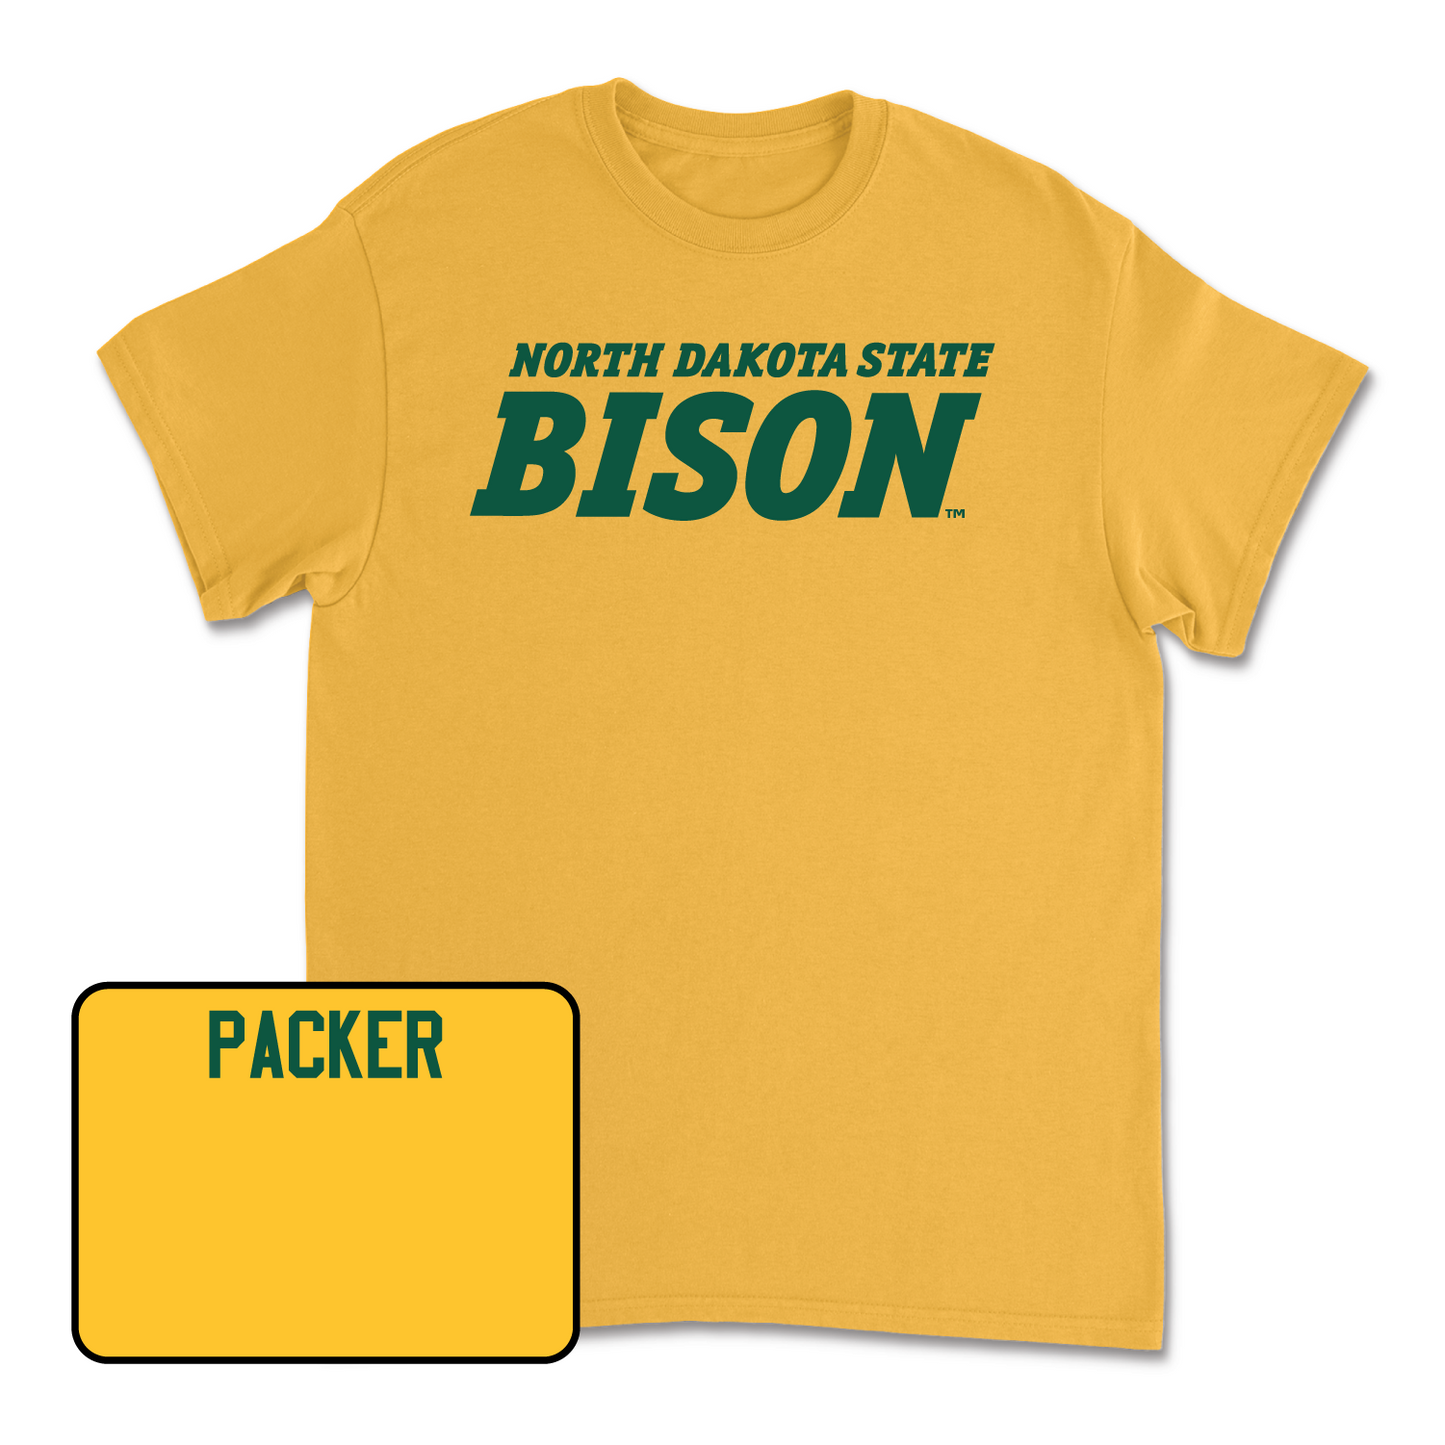 Gold Track & Field Bison Tee Large / Jack Packer